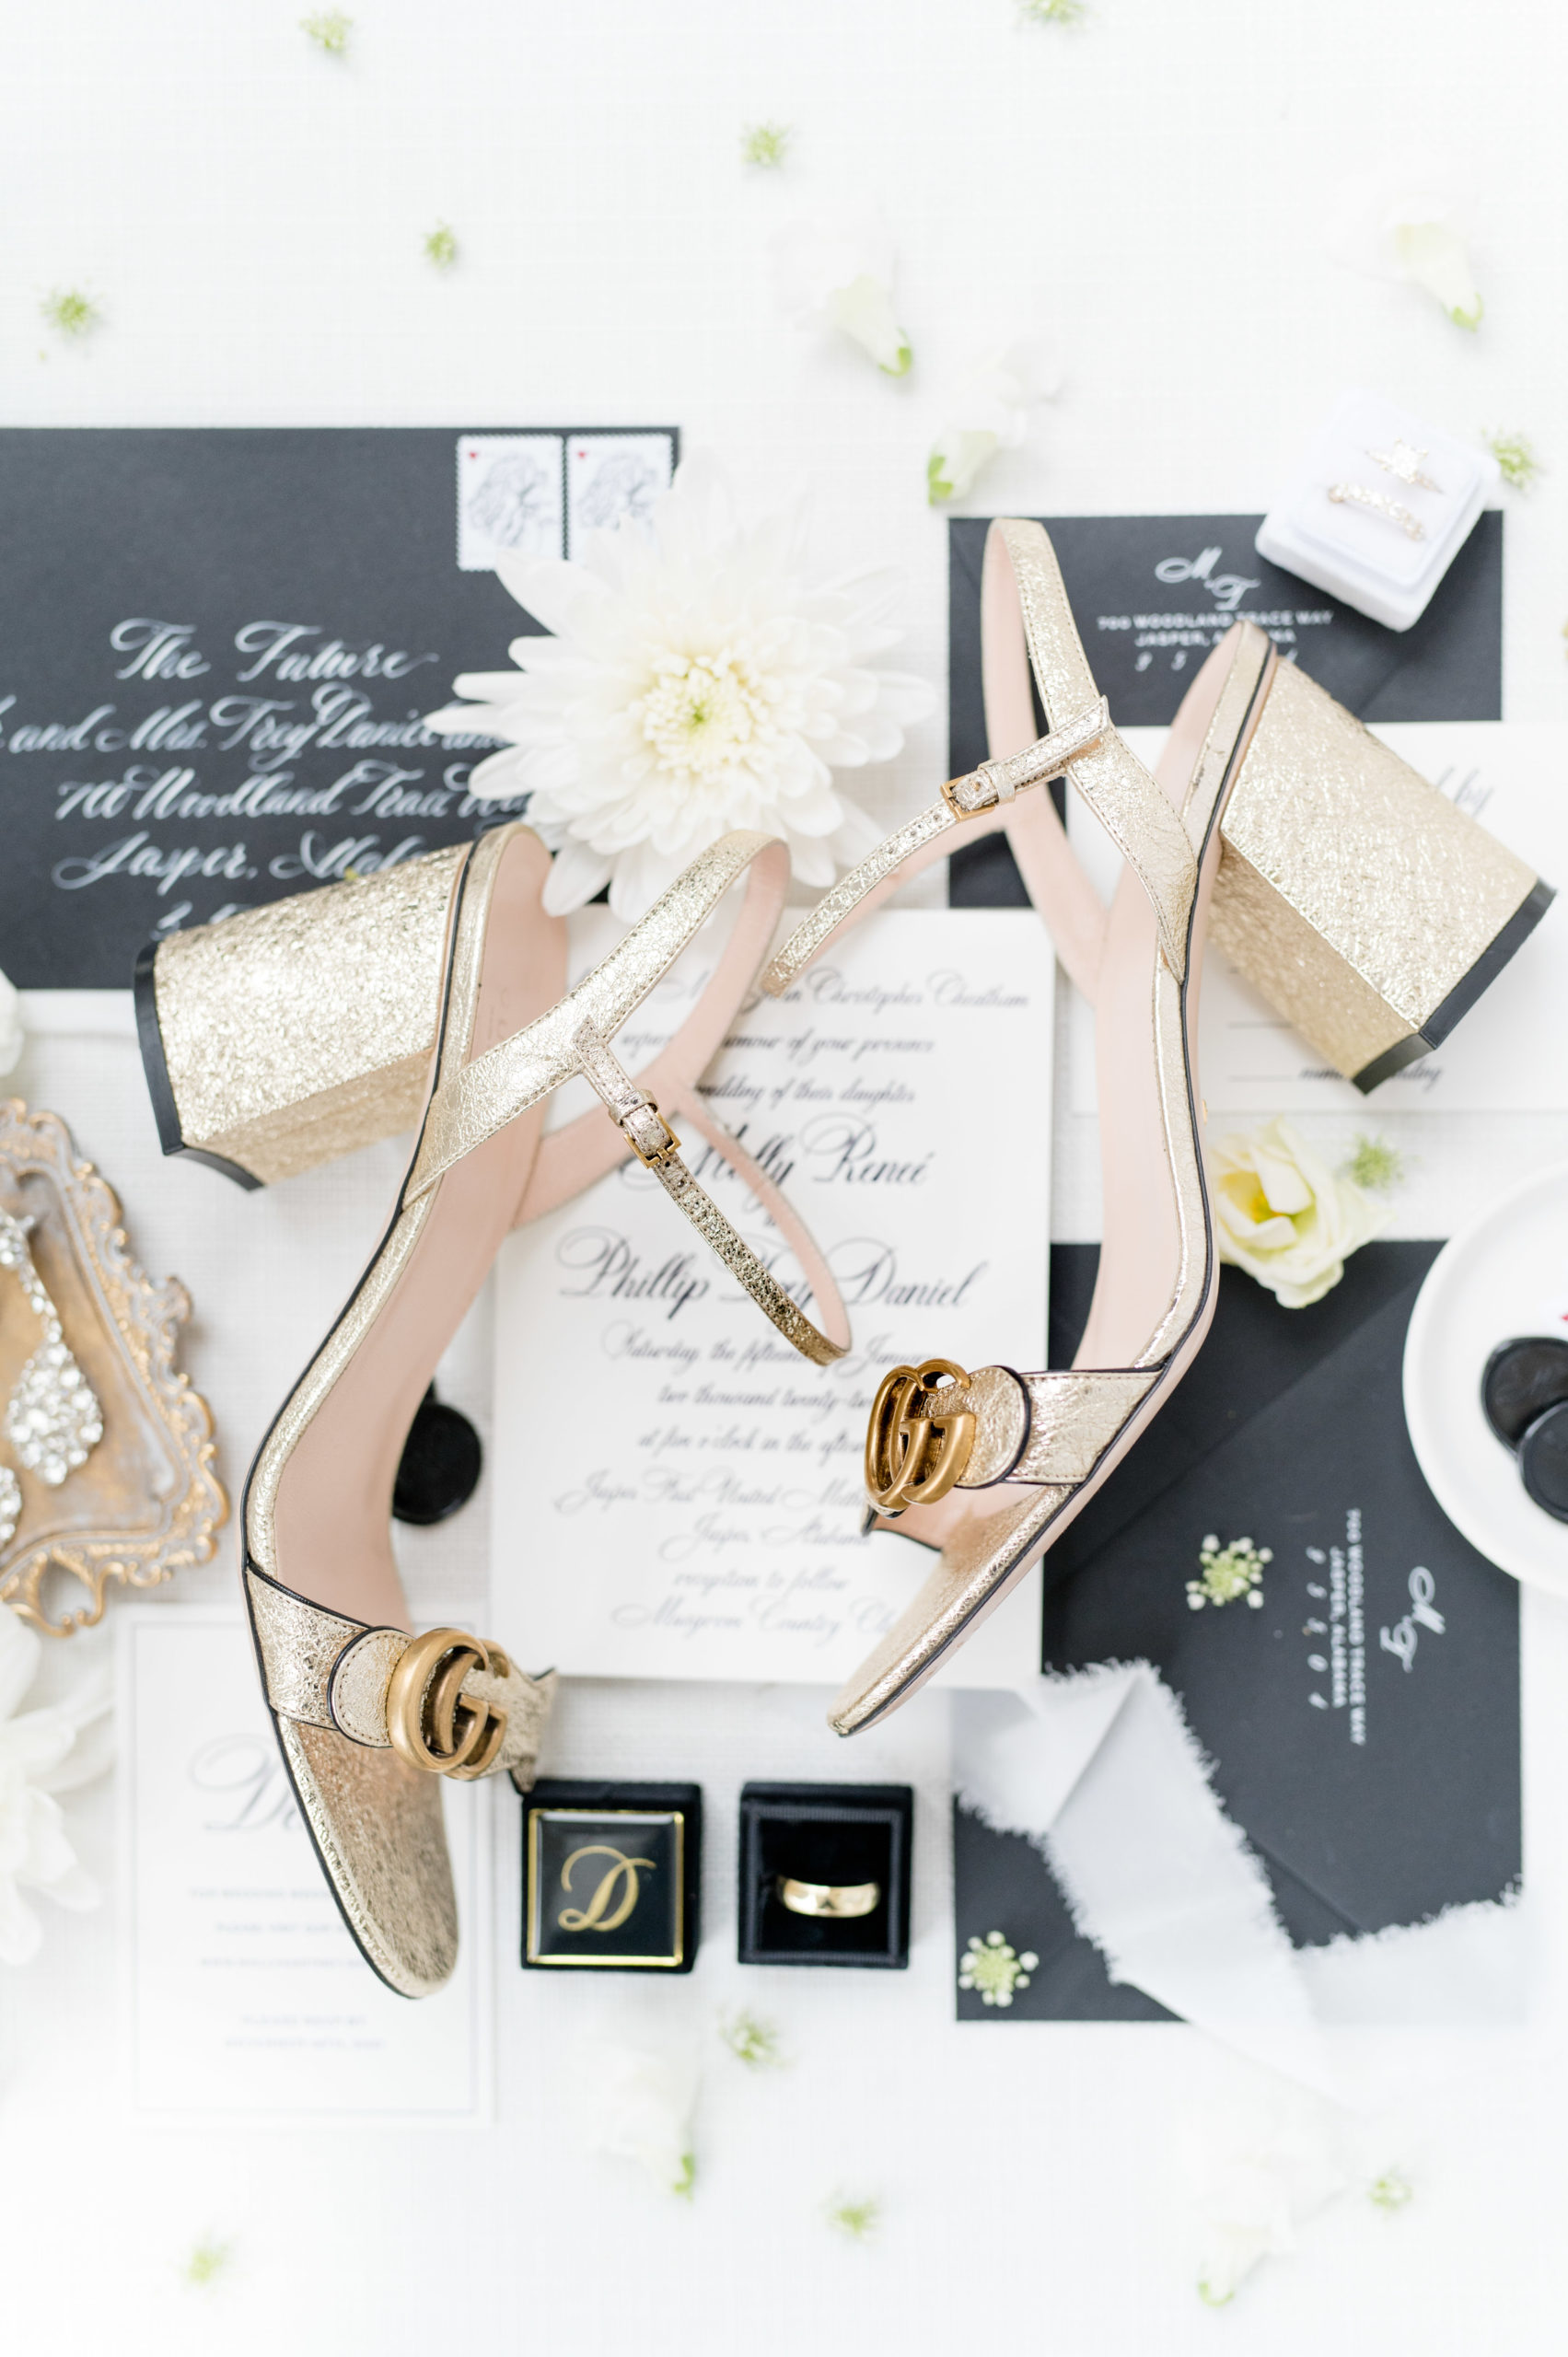 Bride's shoes sit with wedding invitation.